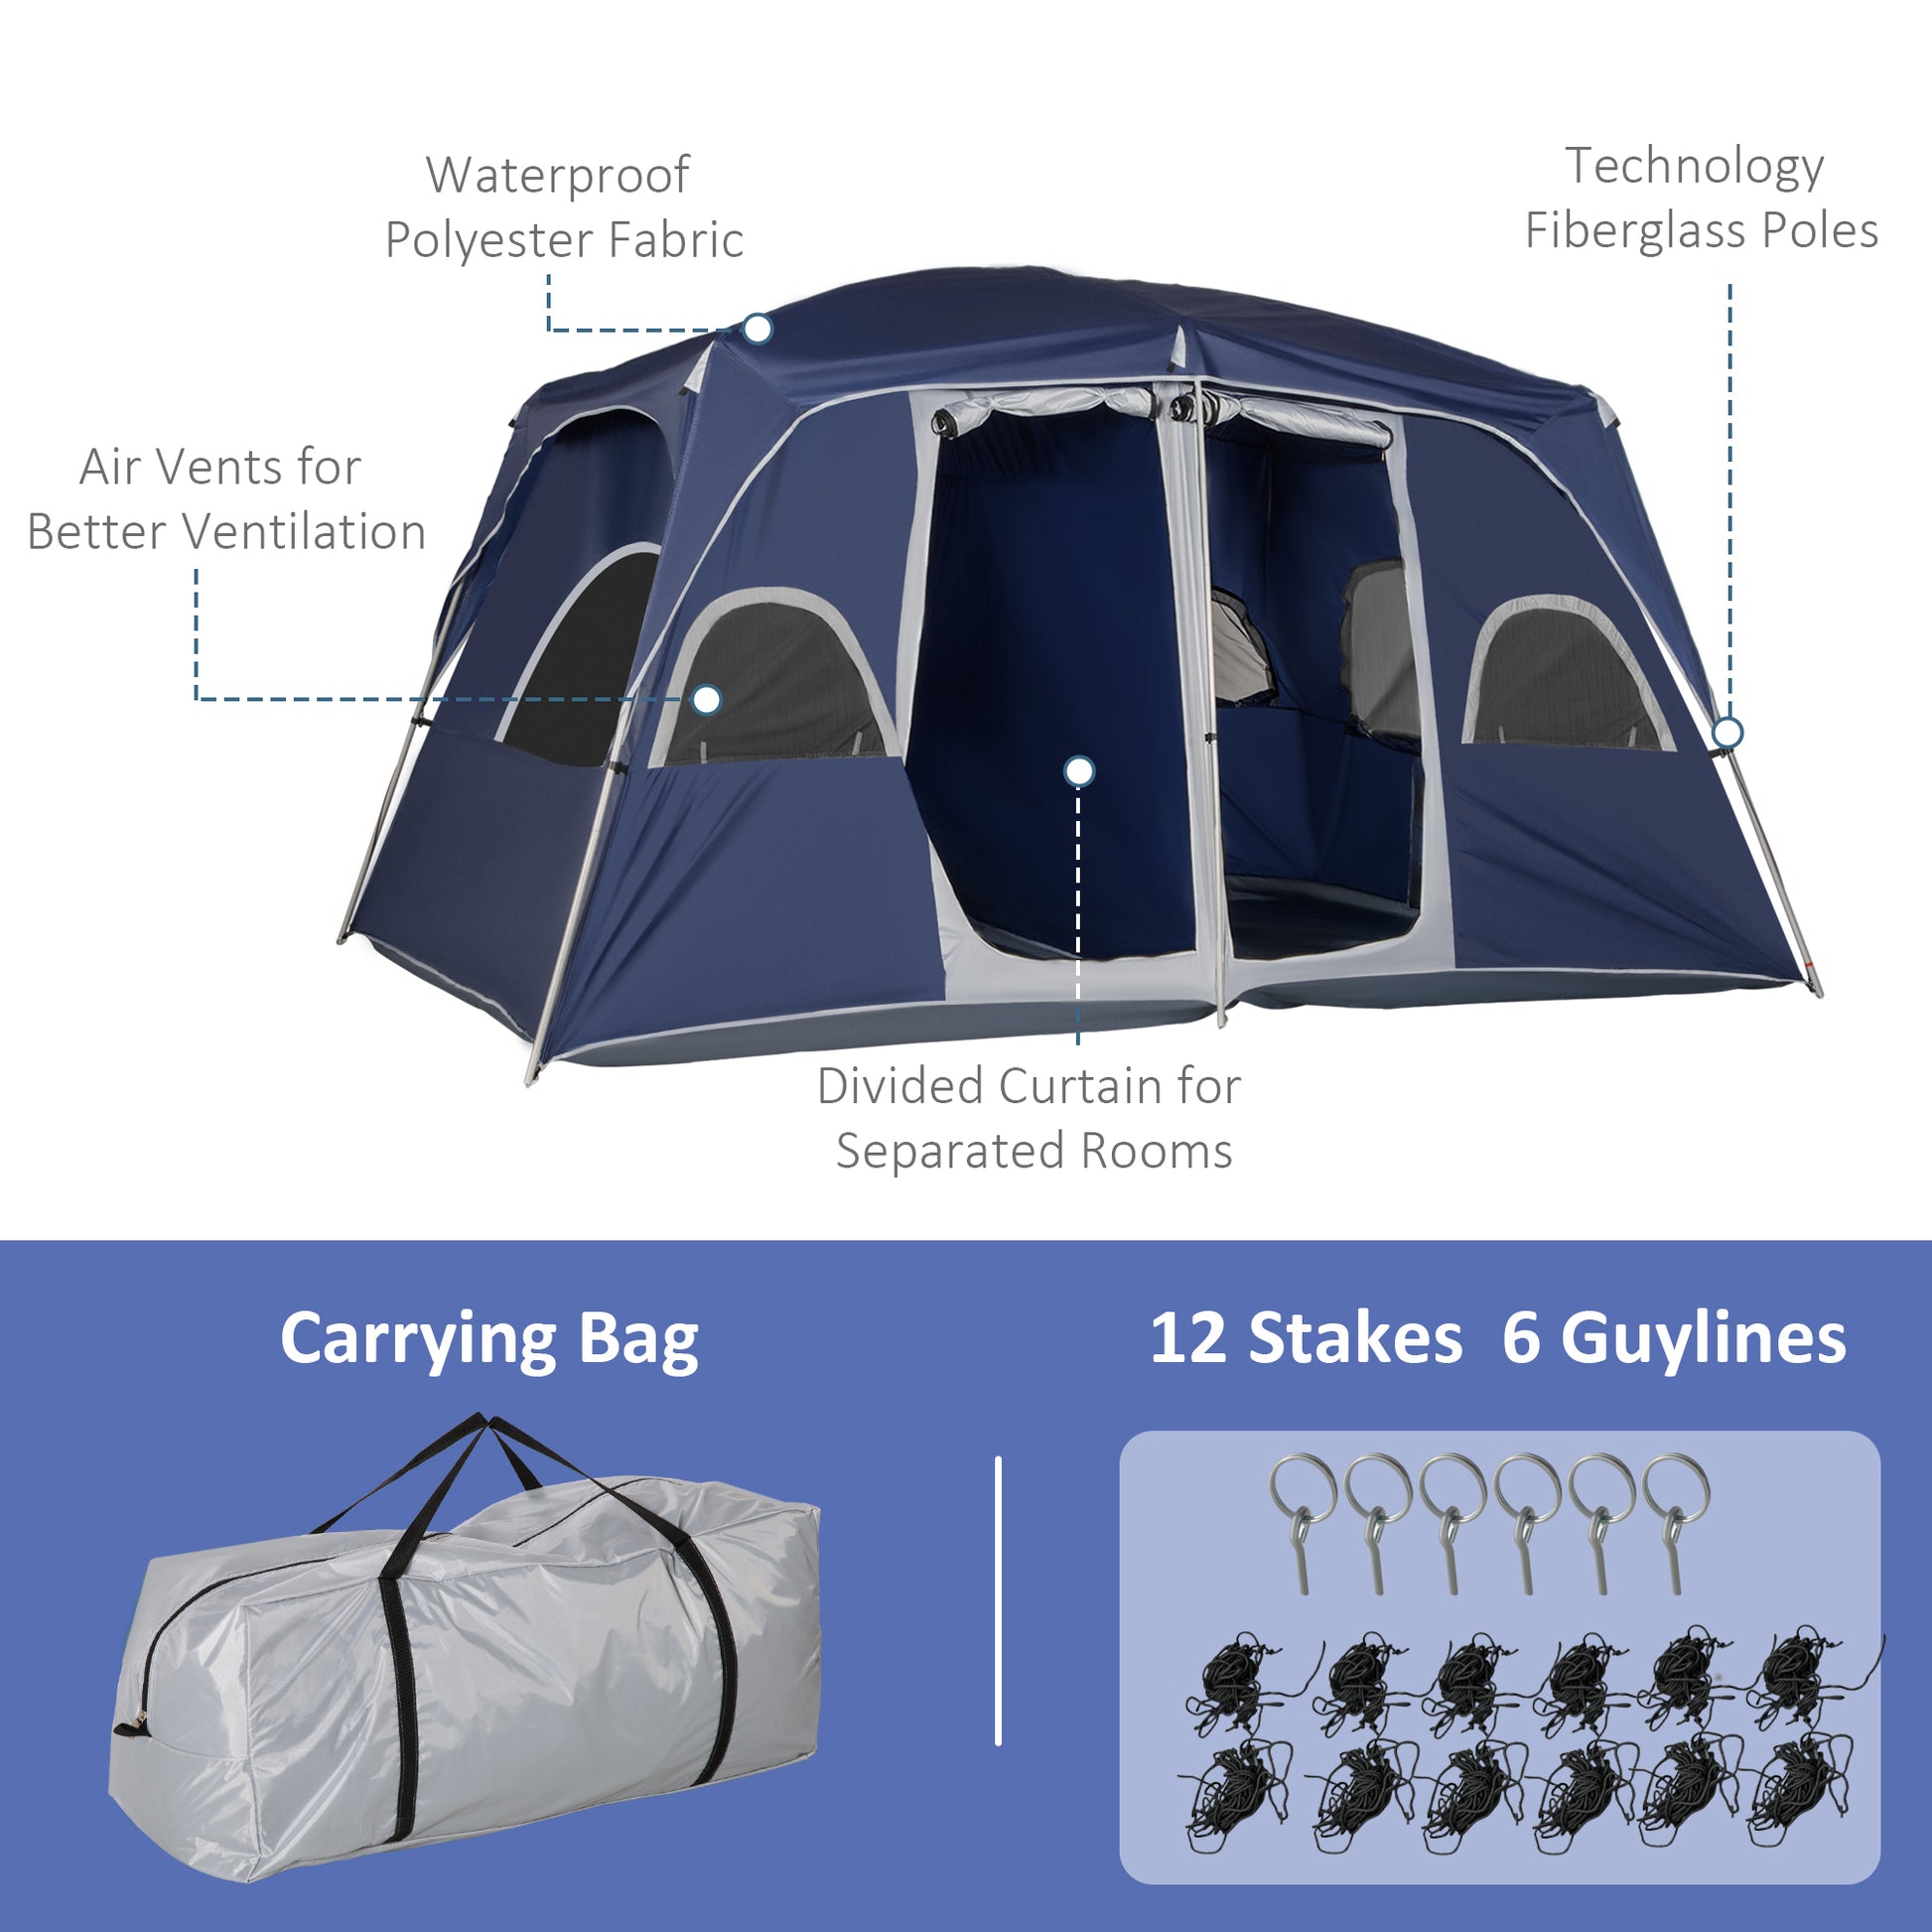 Camping Tent, Family Tent 4-8 Person 2 Room, with Large Mesh Windows, Easy Set Up for Backpacking Hiking Outdoor 13' x 9' x 7', Blue at Gallery Canada